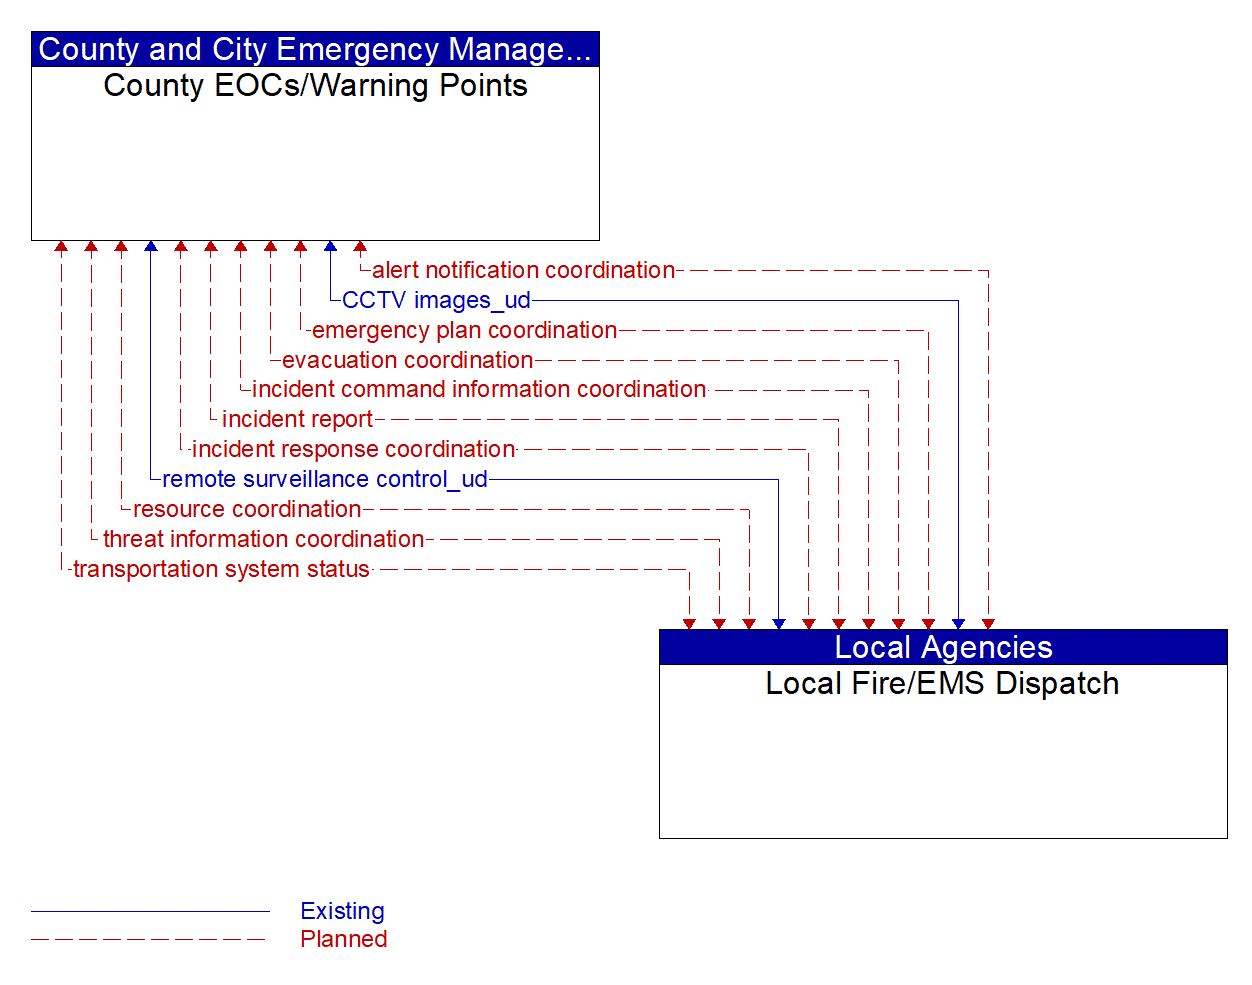 Architecture Flow Diagram: Local Fire/EMS Dispatch <--> County EOCs/Warning Points